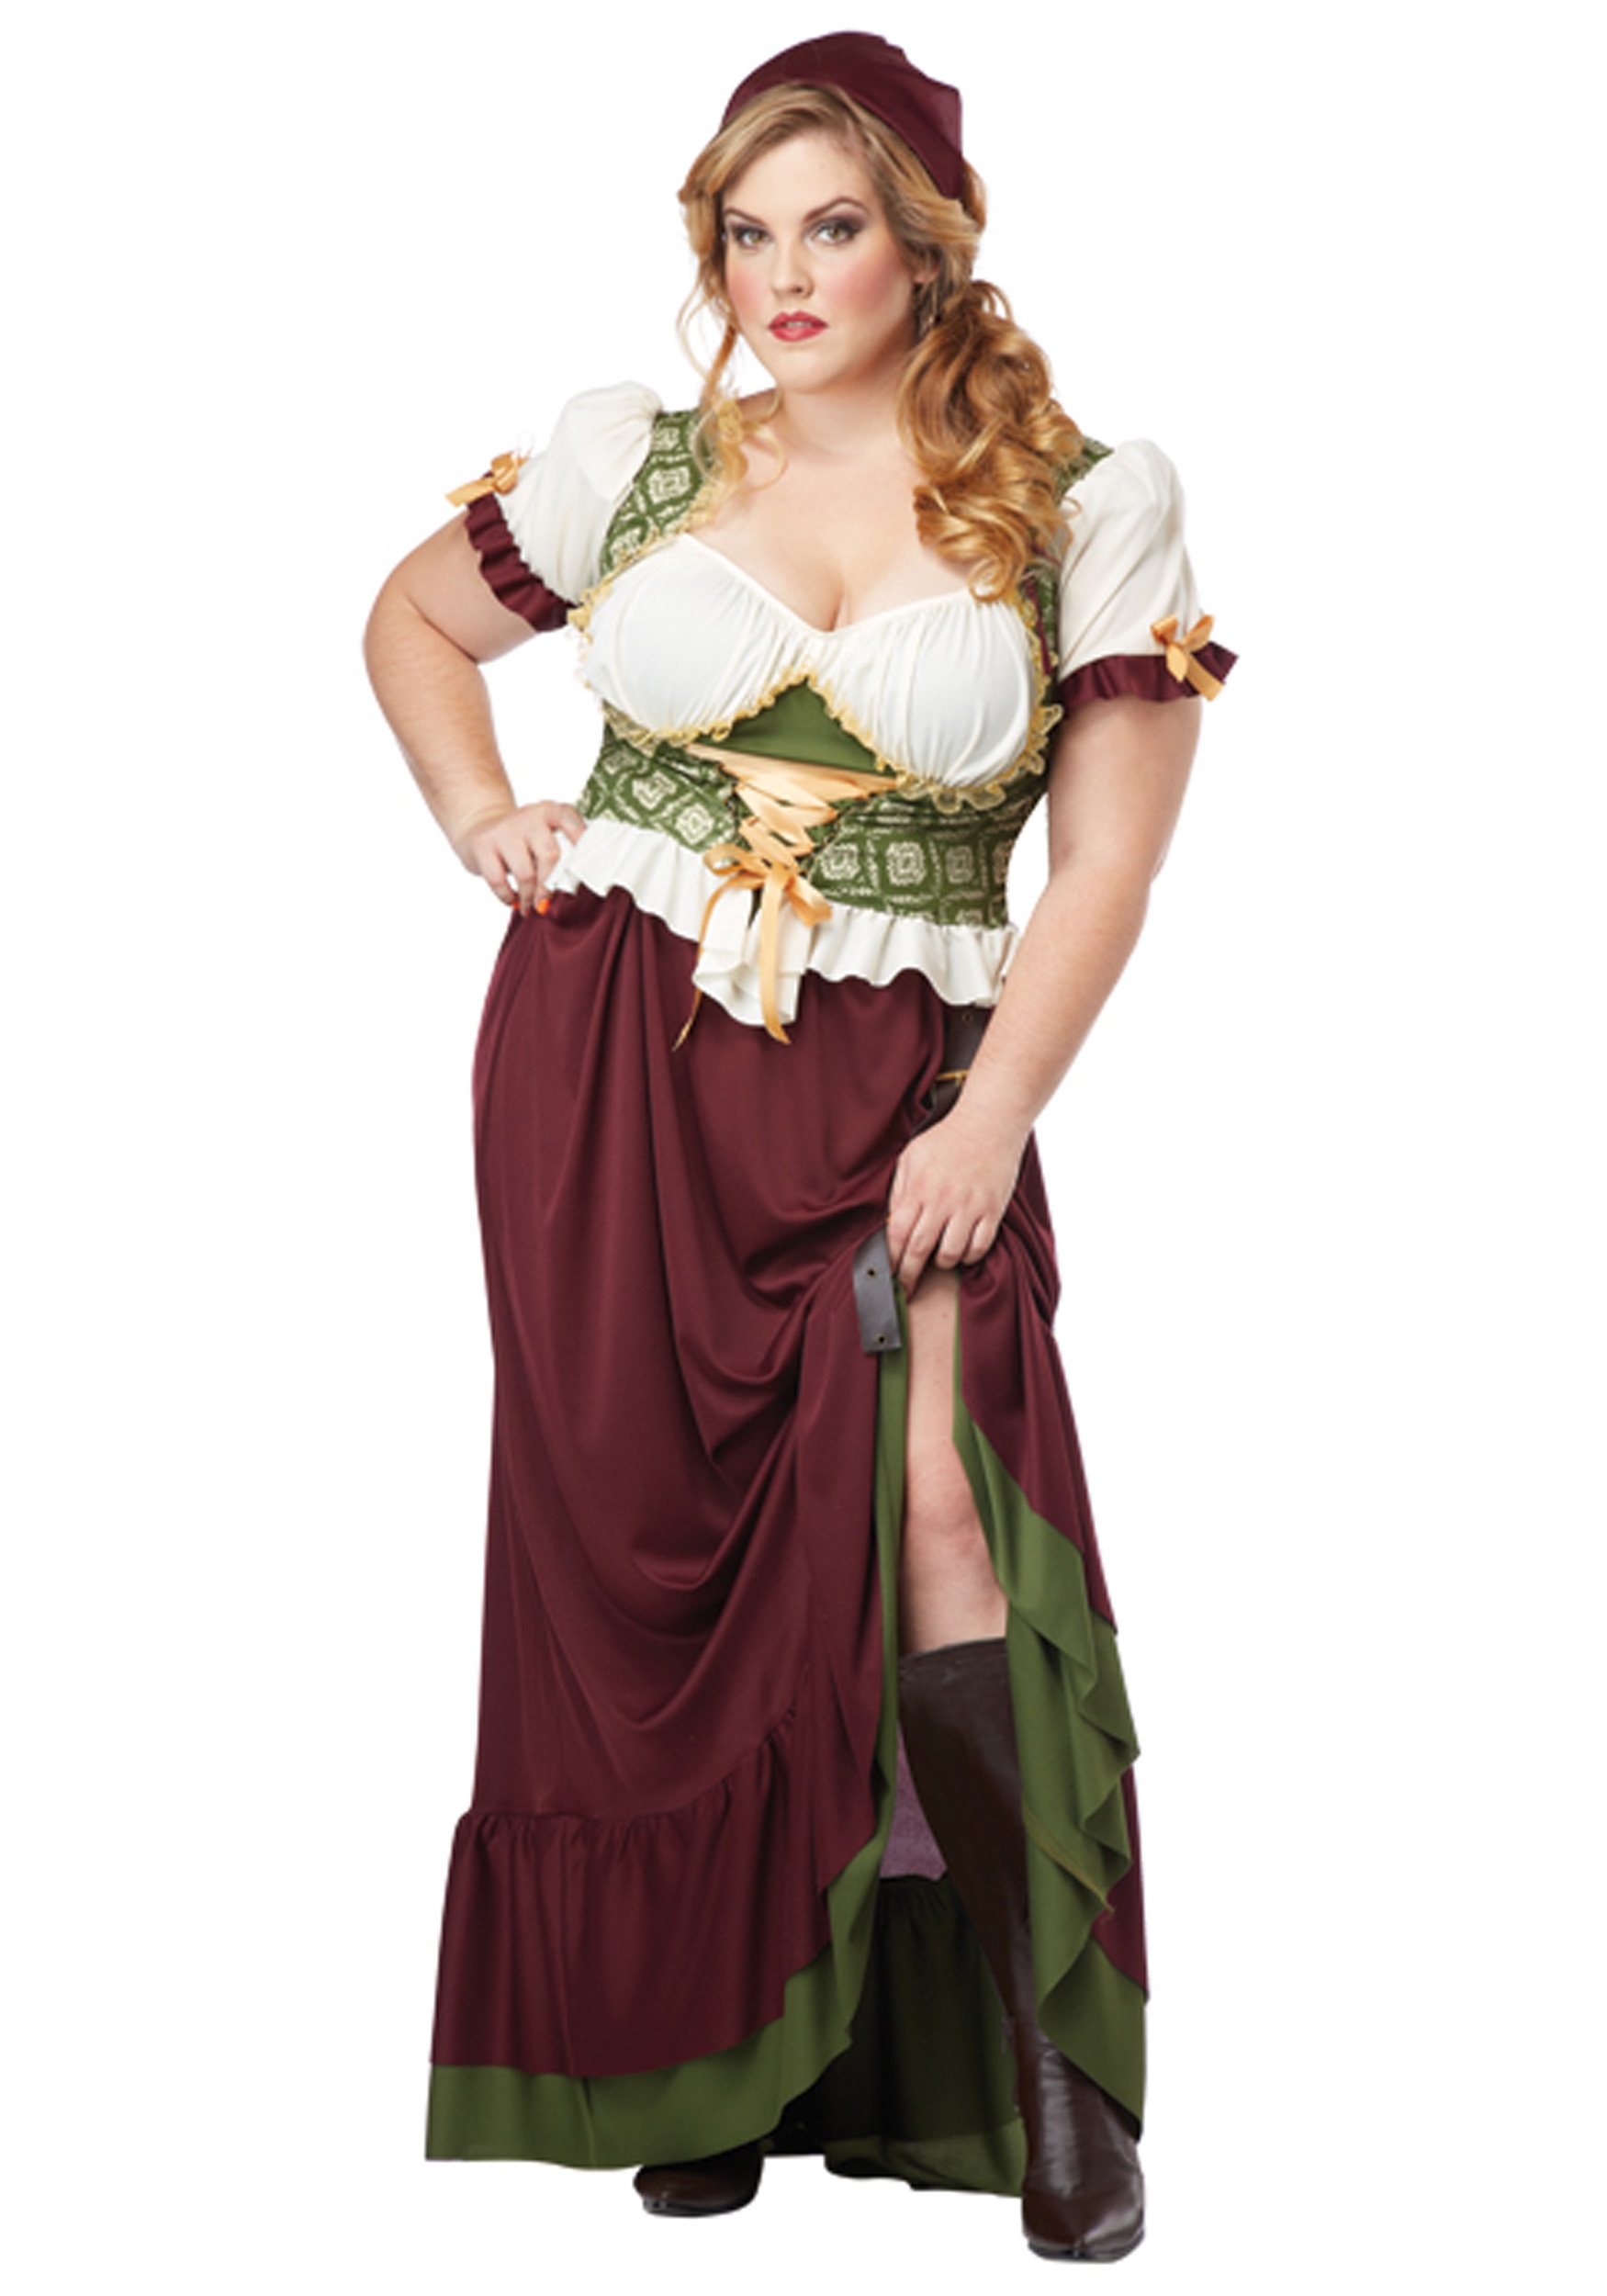 FANCY DRESS Wench Medieval Adult Female Costume 